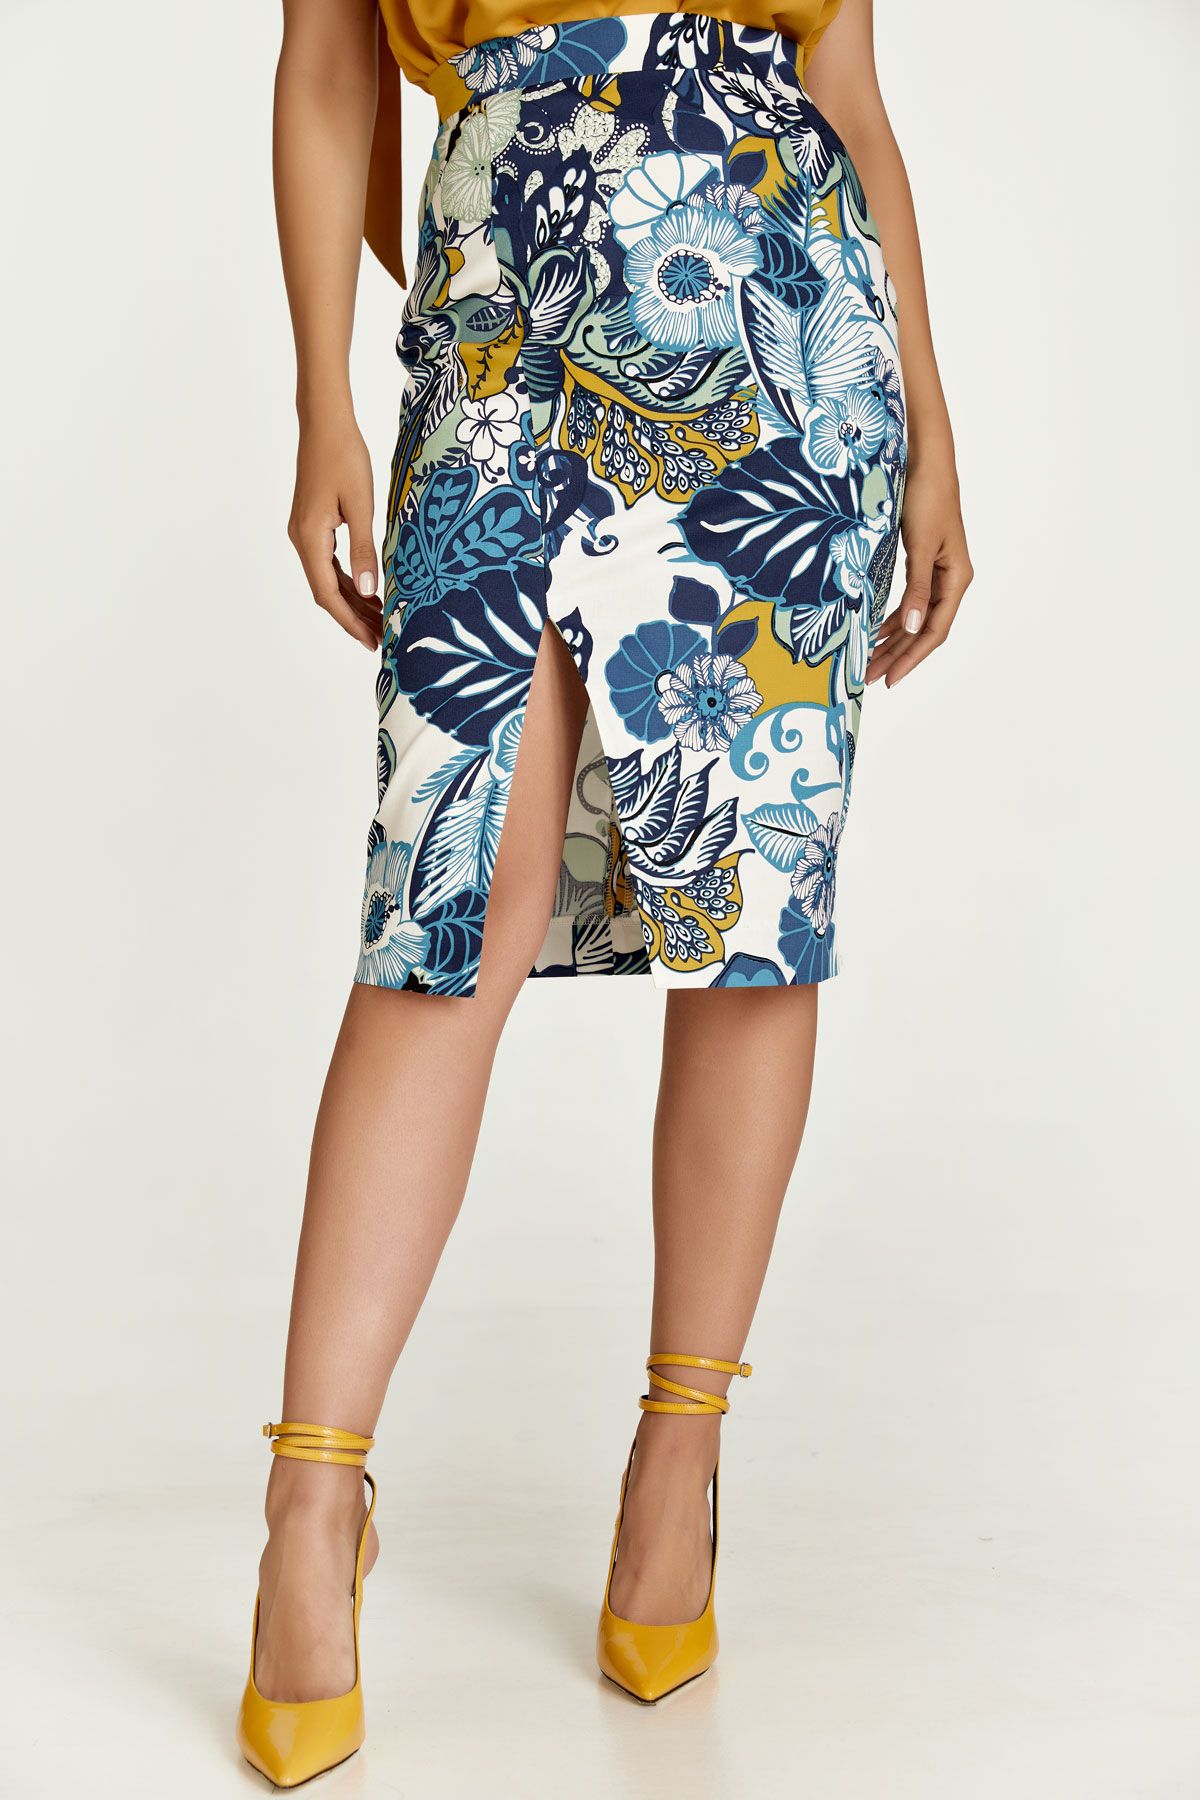 This pencil skirt is crafted in floral stretch gabardine fabric in blue and green shades. It has a 4cm wide waistband in the same fabric with darts below in the back. There is an off-centre slit in the front. It fastens in the back with a concealed zip. This pencil skirt is knee length and has an ecru lining. Heels and an off-shoulder top will take this skirt and you for a night on the town! This skirt is eco-friendly.